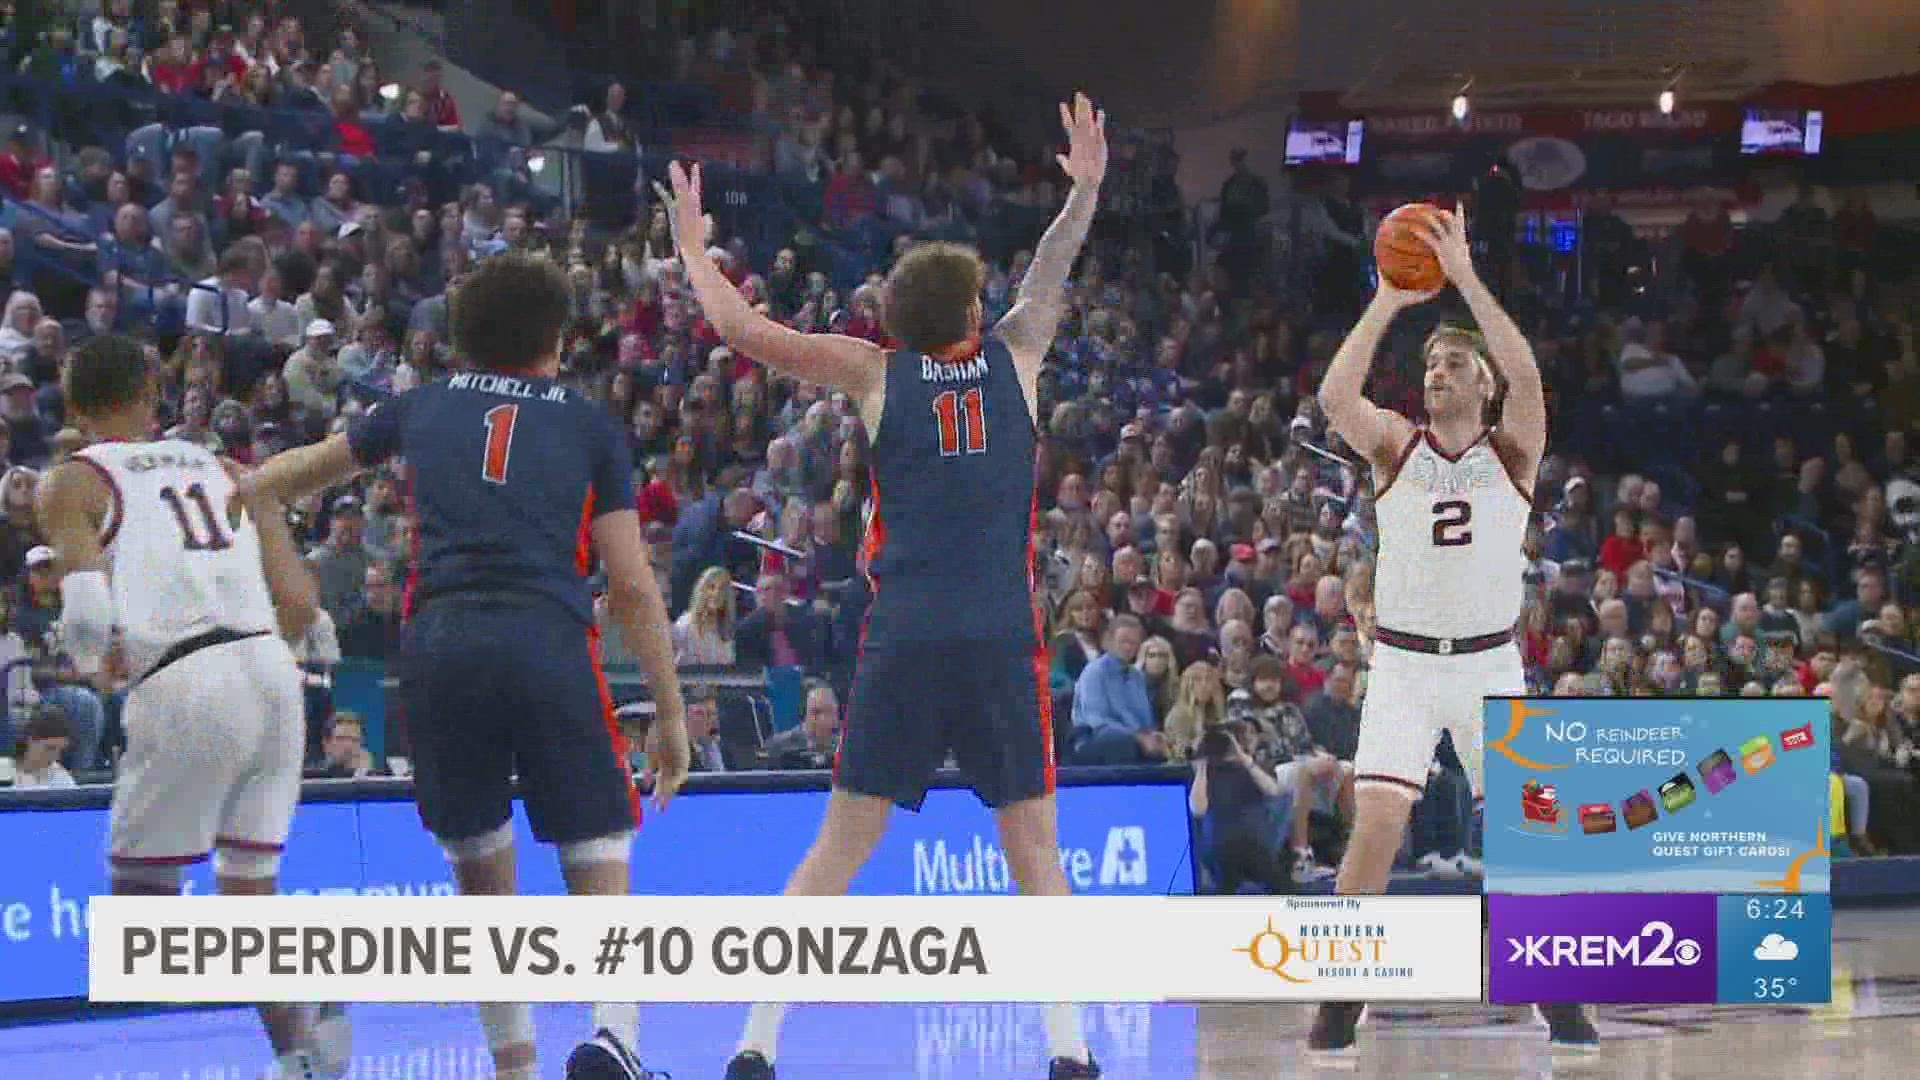 Five Zags score in double figures including Julian Strawther with 22 points as Zags rout Waves.